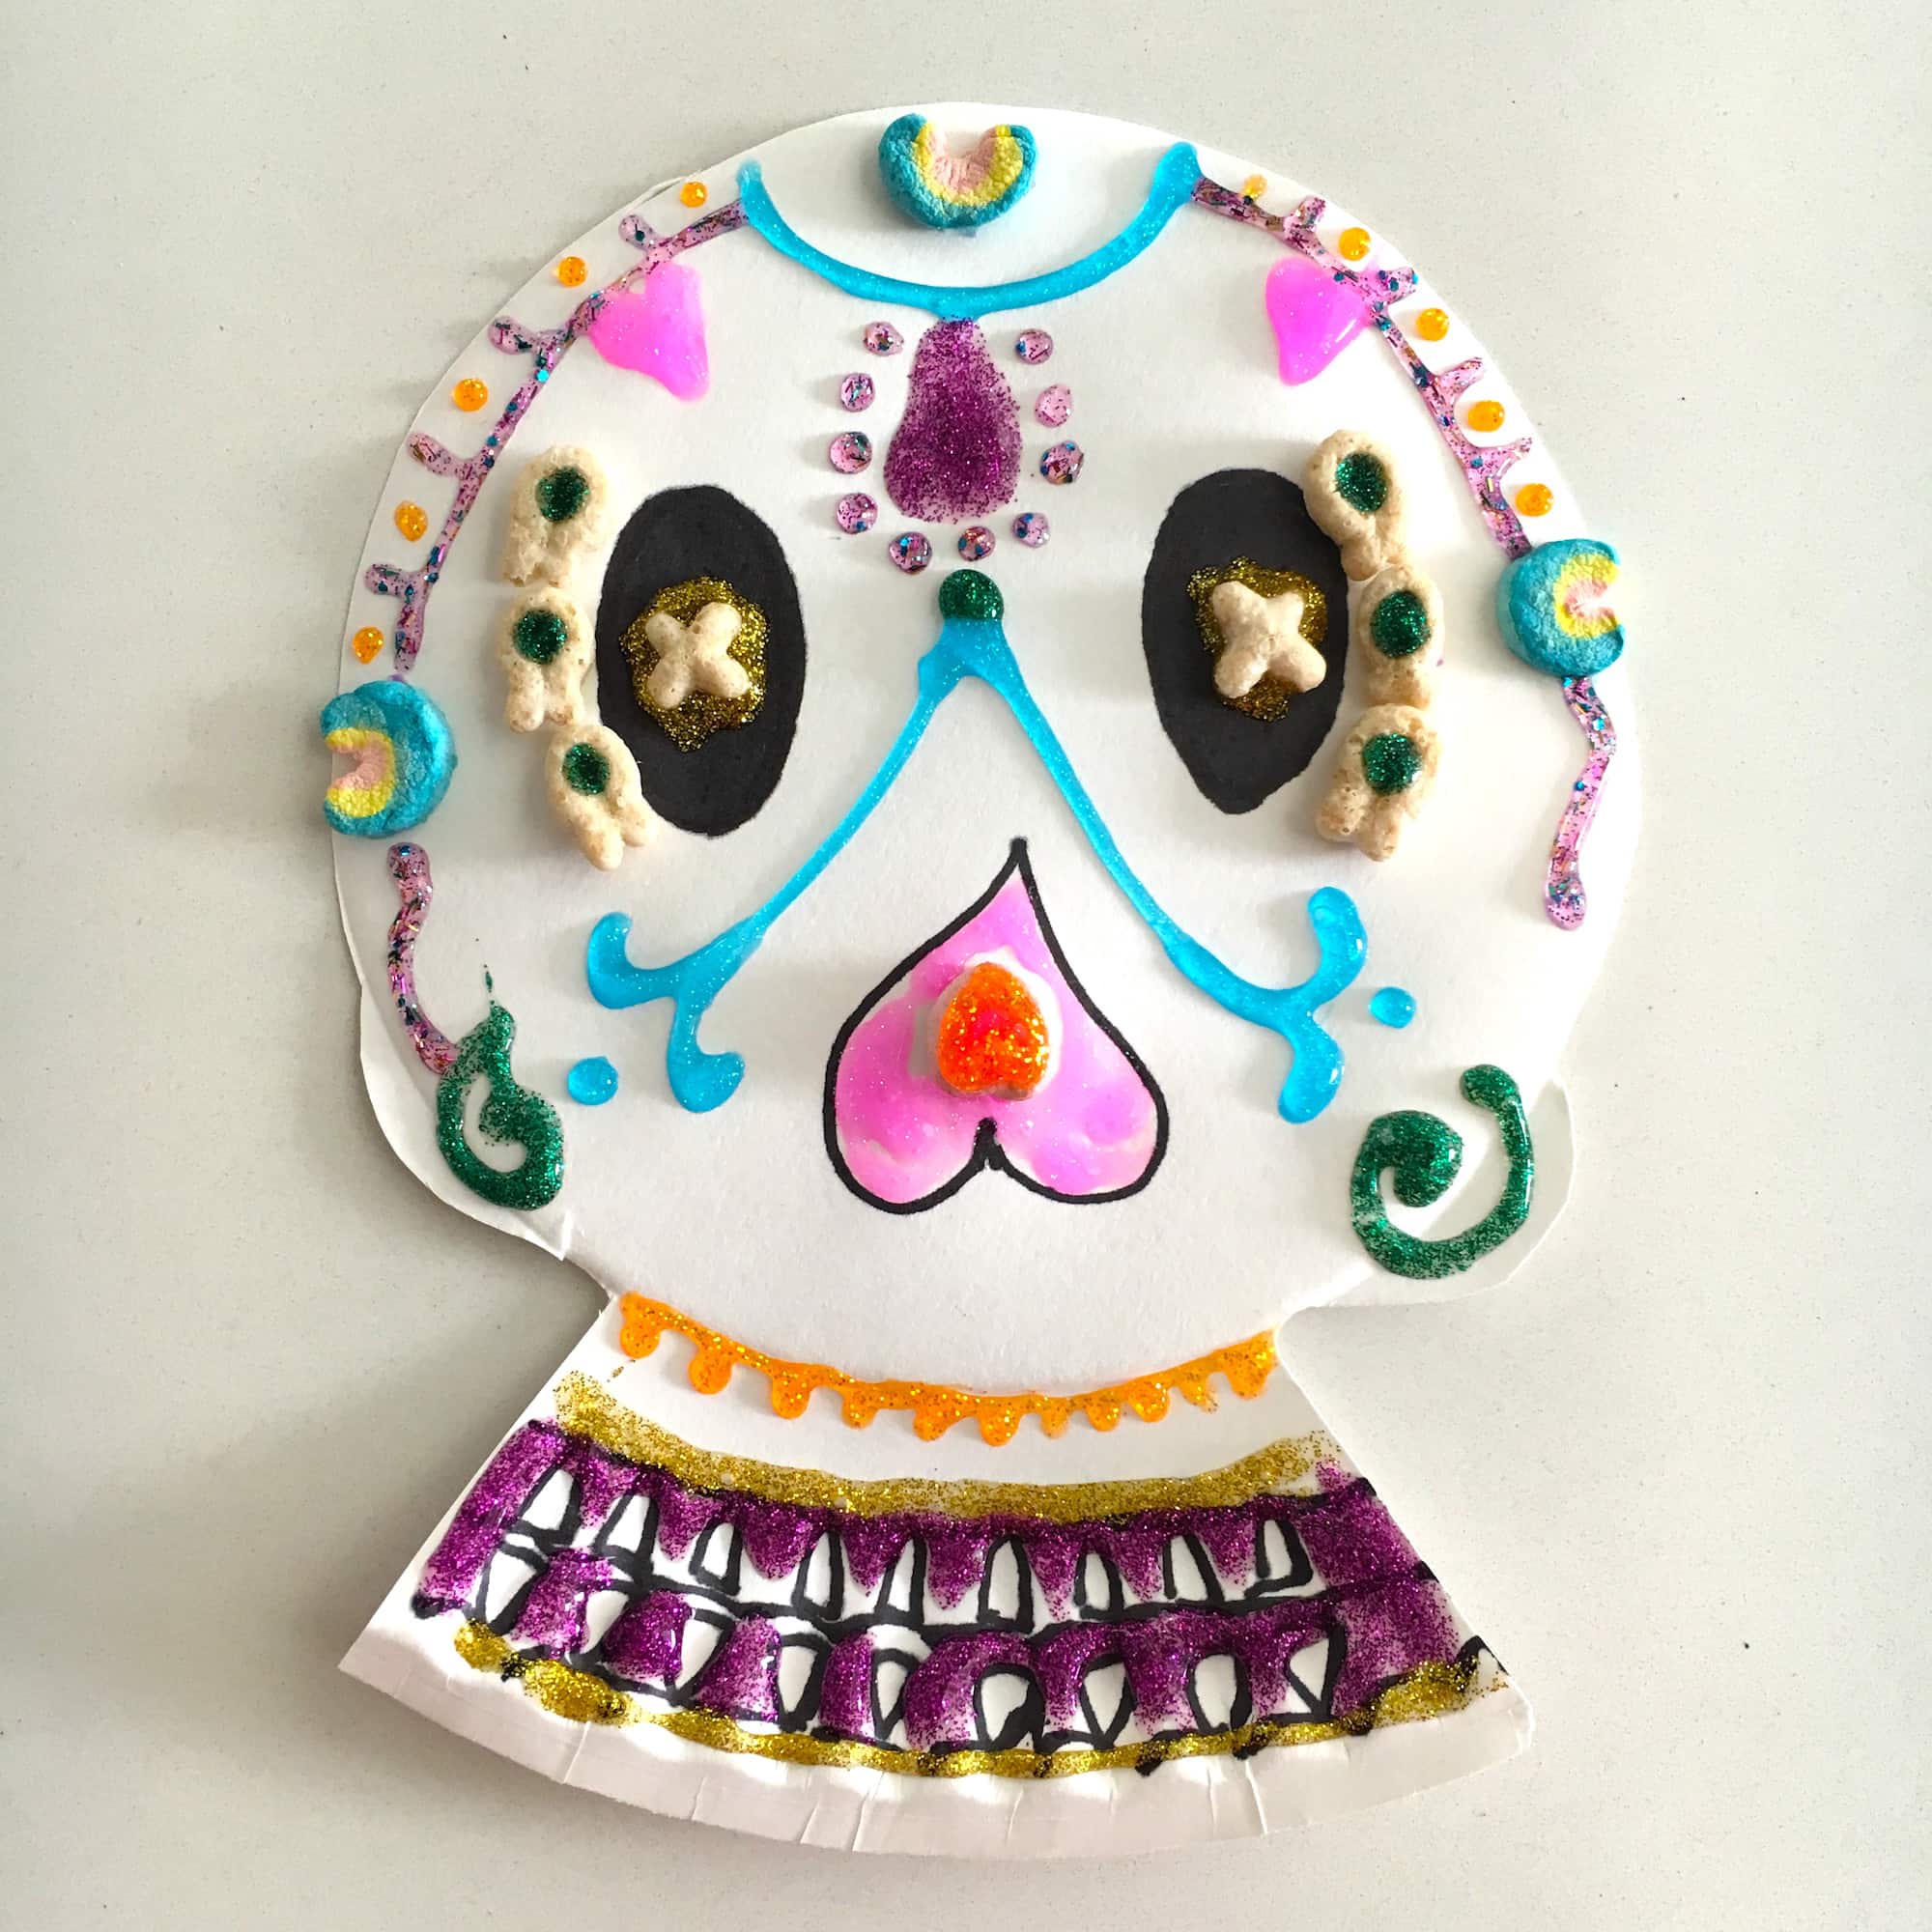 Craft For The Day Of The Dead: Paper Plate Skull